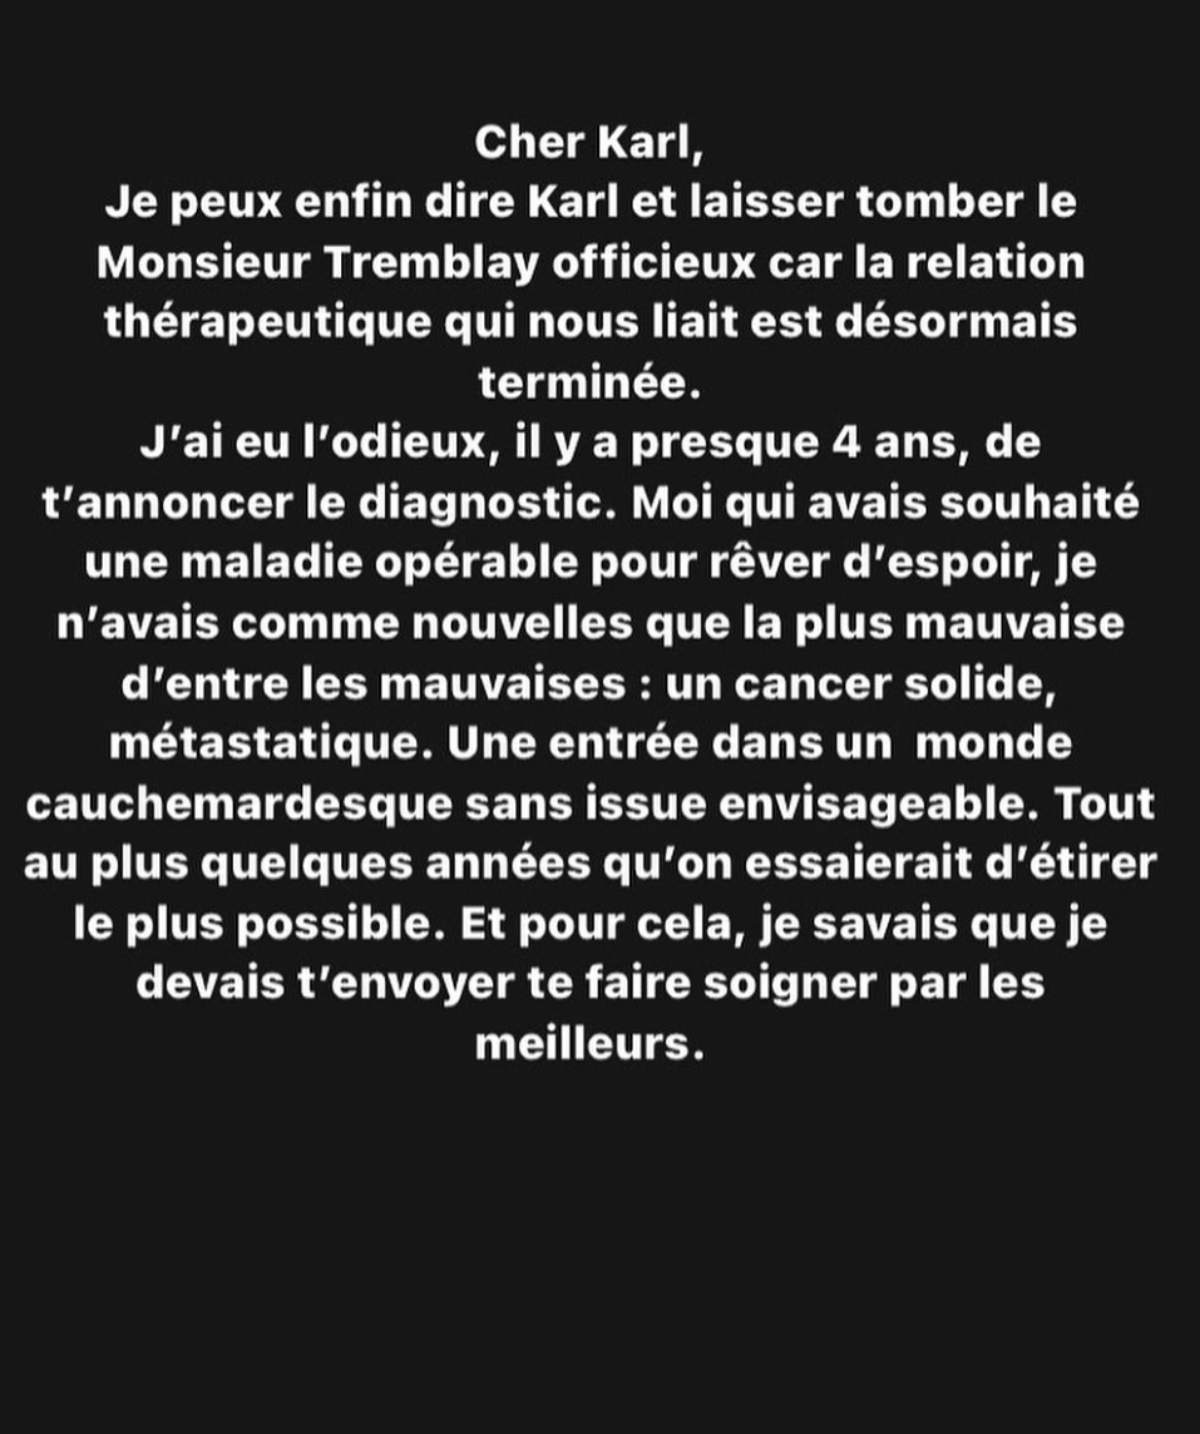 Oncologue Karl Tremblay message